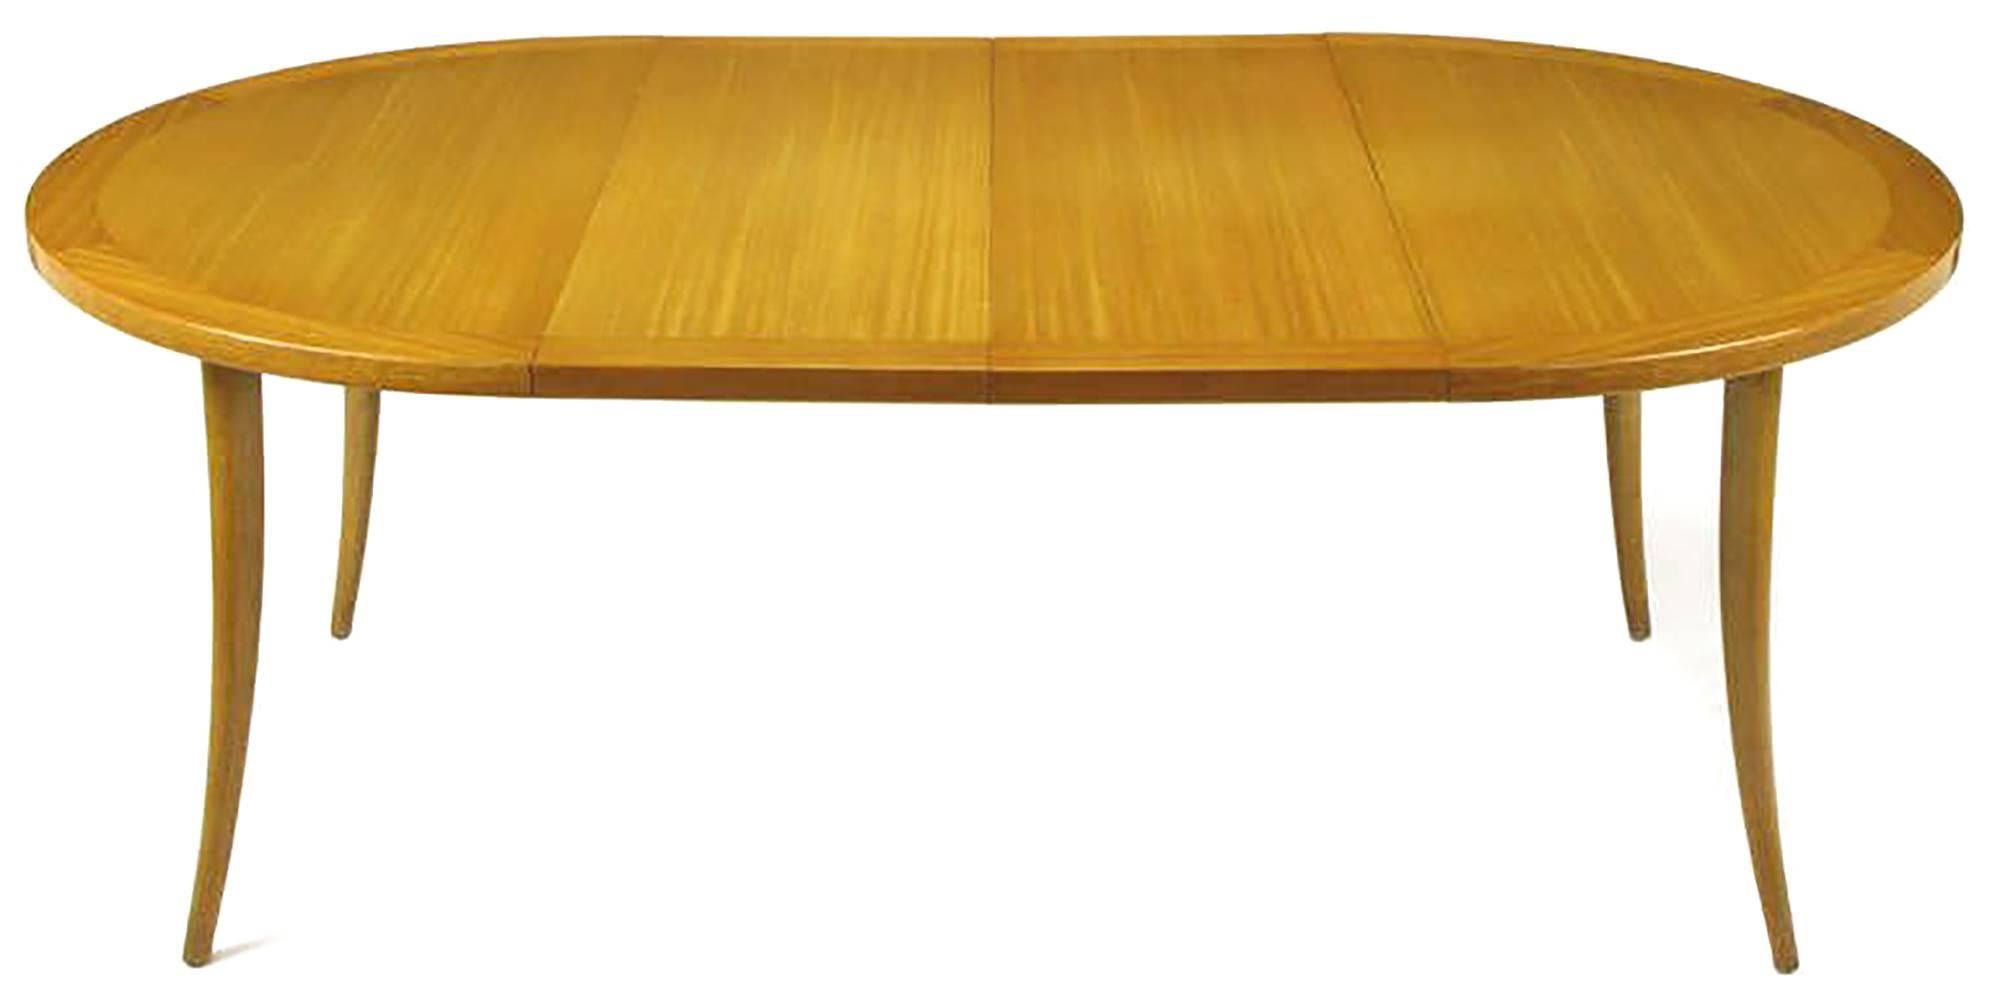 Harvey Probber Bleached Mahogany Saber Leg Dining Table In Good Condition For Sale In Chicago, IL